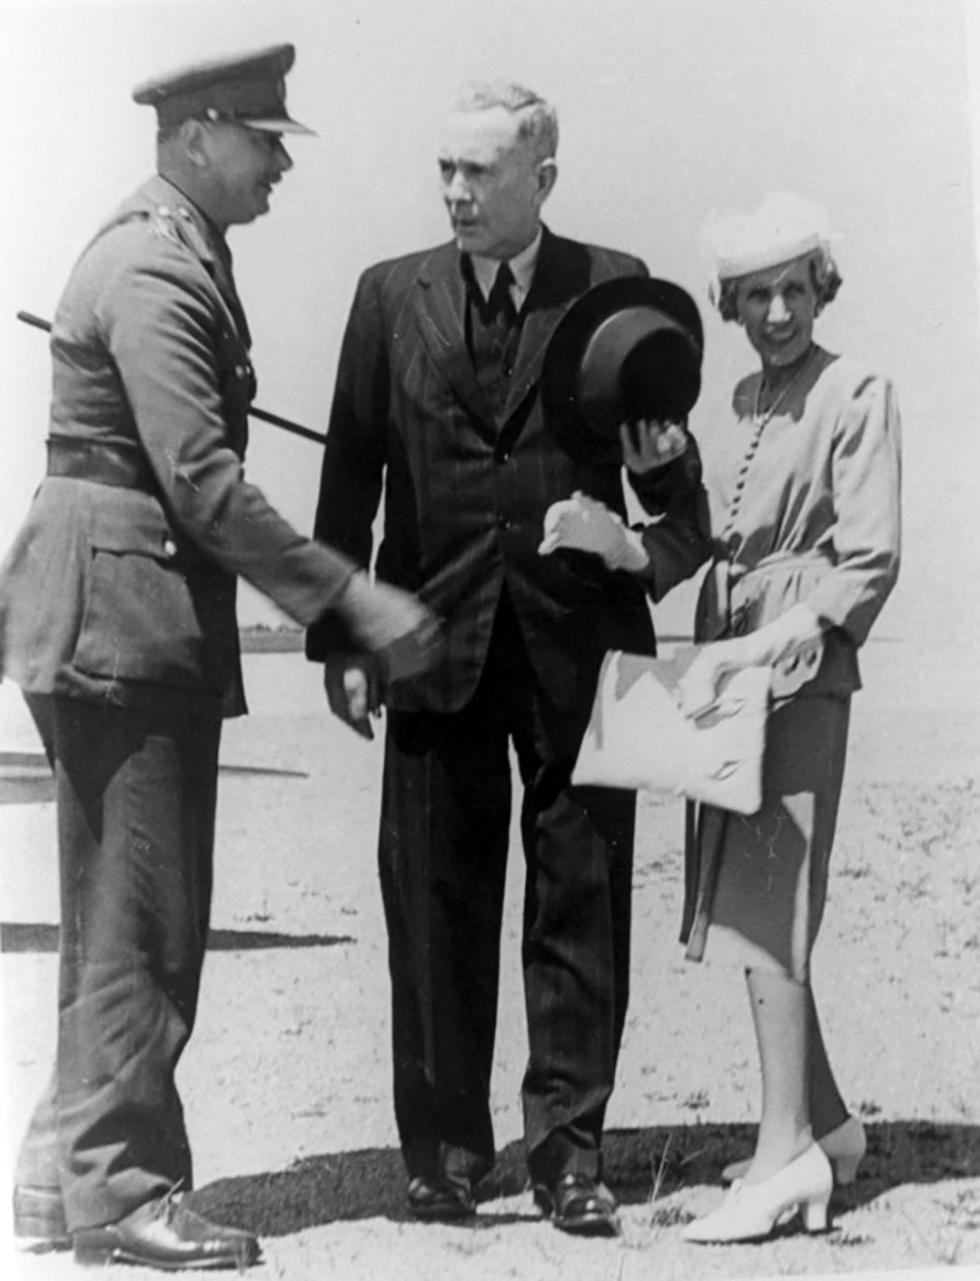 Elizabeth and Ben Chifley welcome the Governor-General, the Duke of Gloucester, on his visit to Bathurst in 1945.